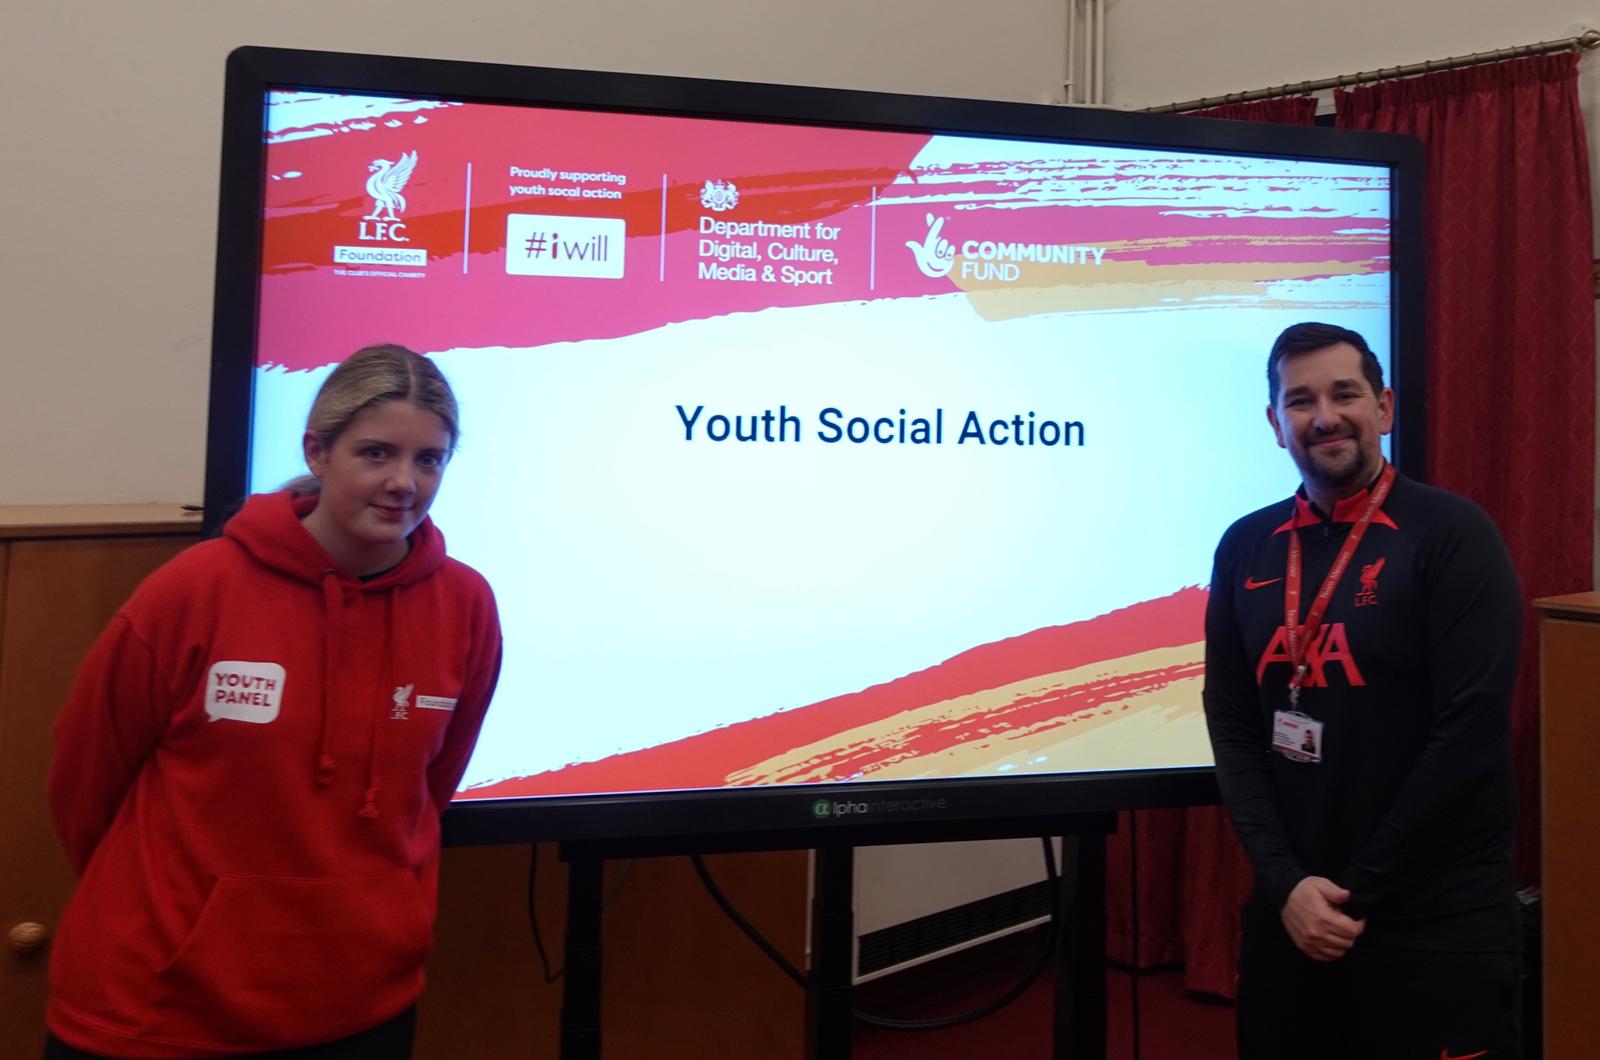 Rosie and her coach stood in front of a screen that says Youth Social Action